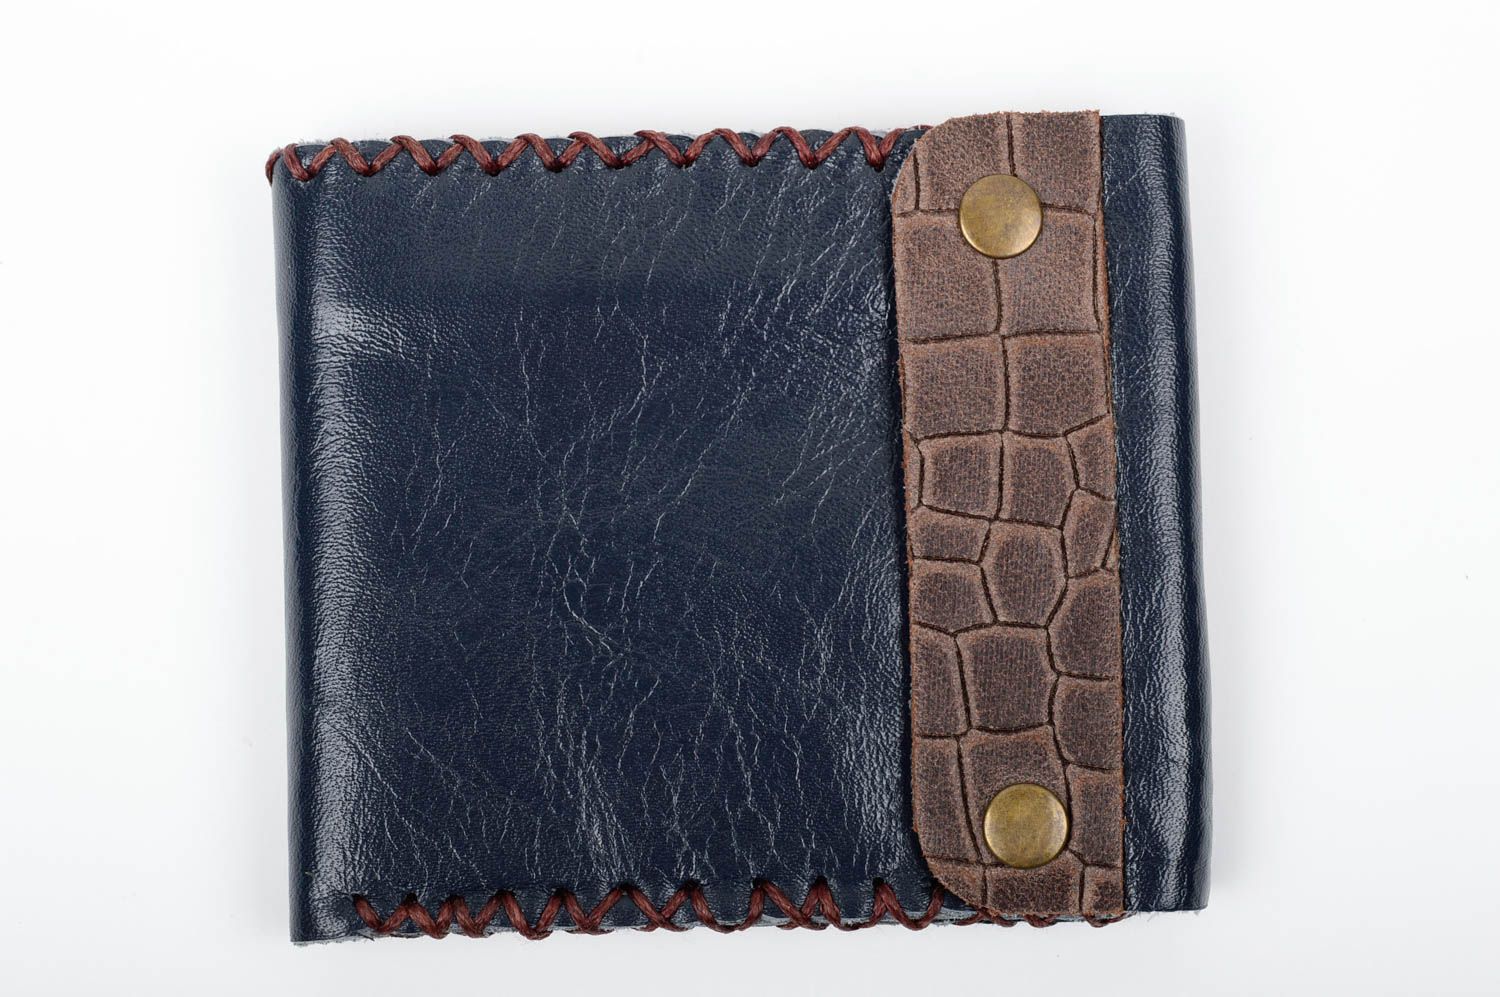 Beautiful handmade wallet leather wallet leather goods designer accessories photo 1